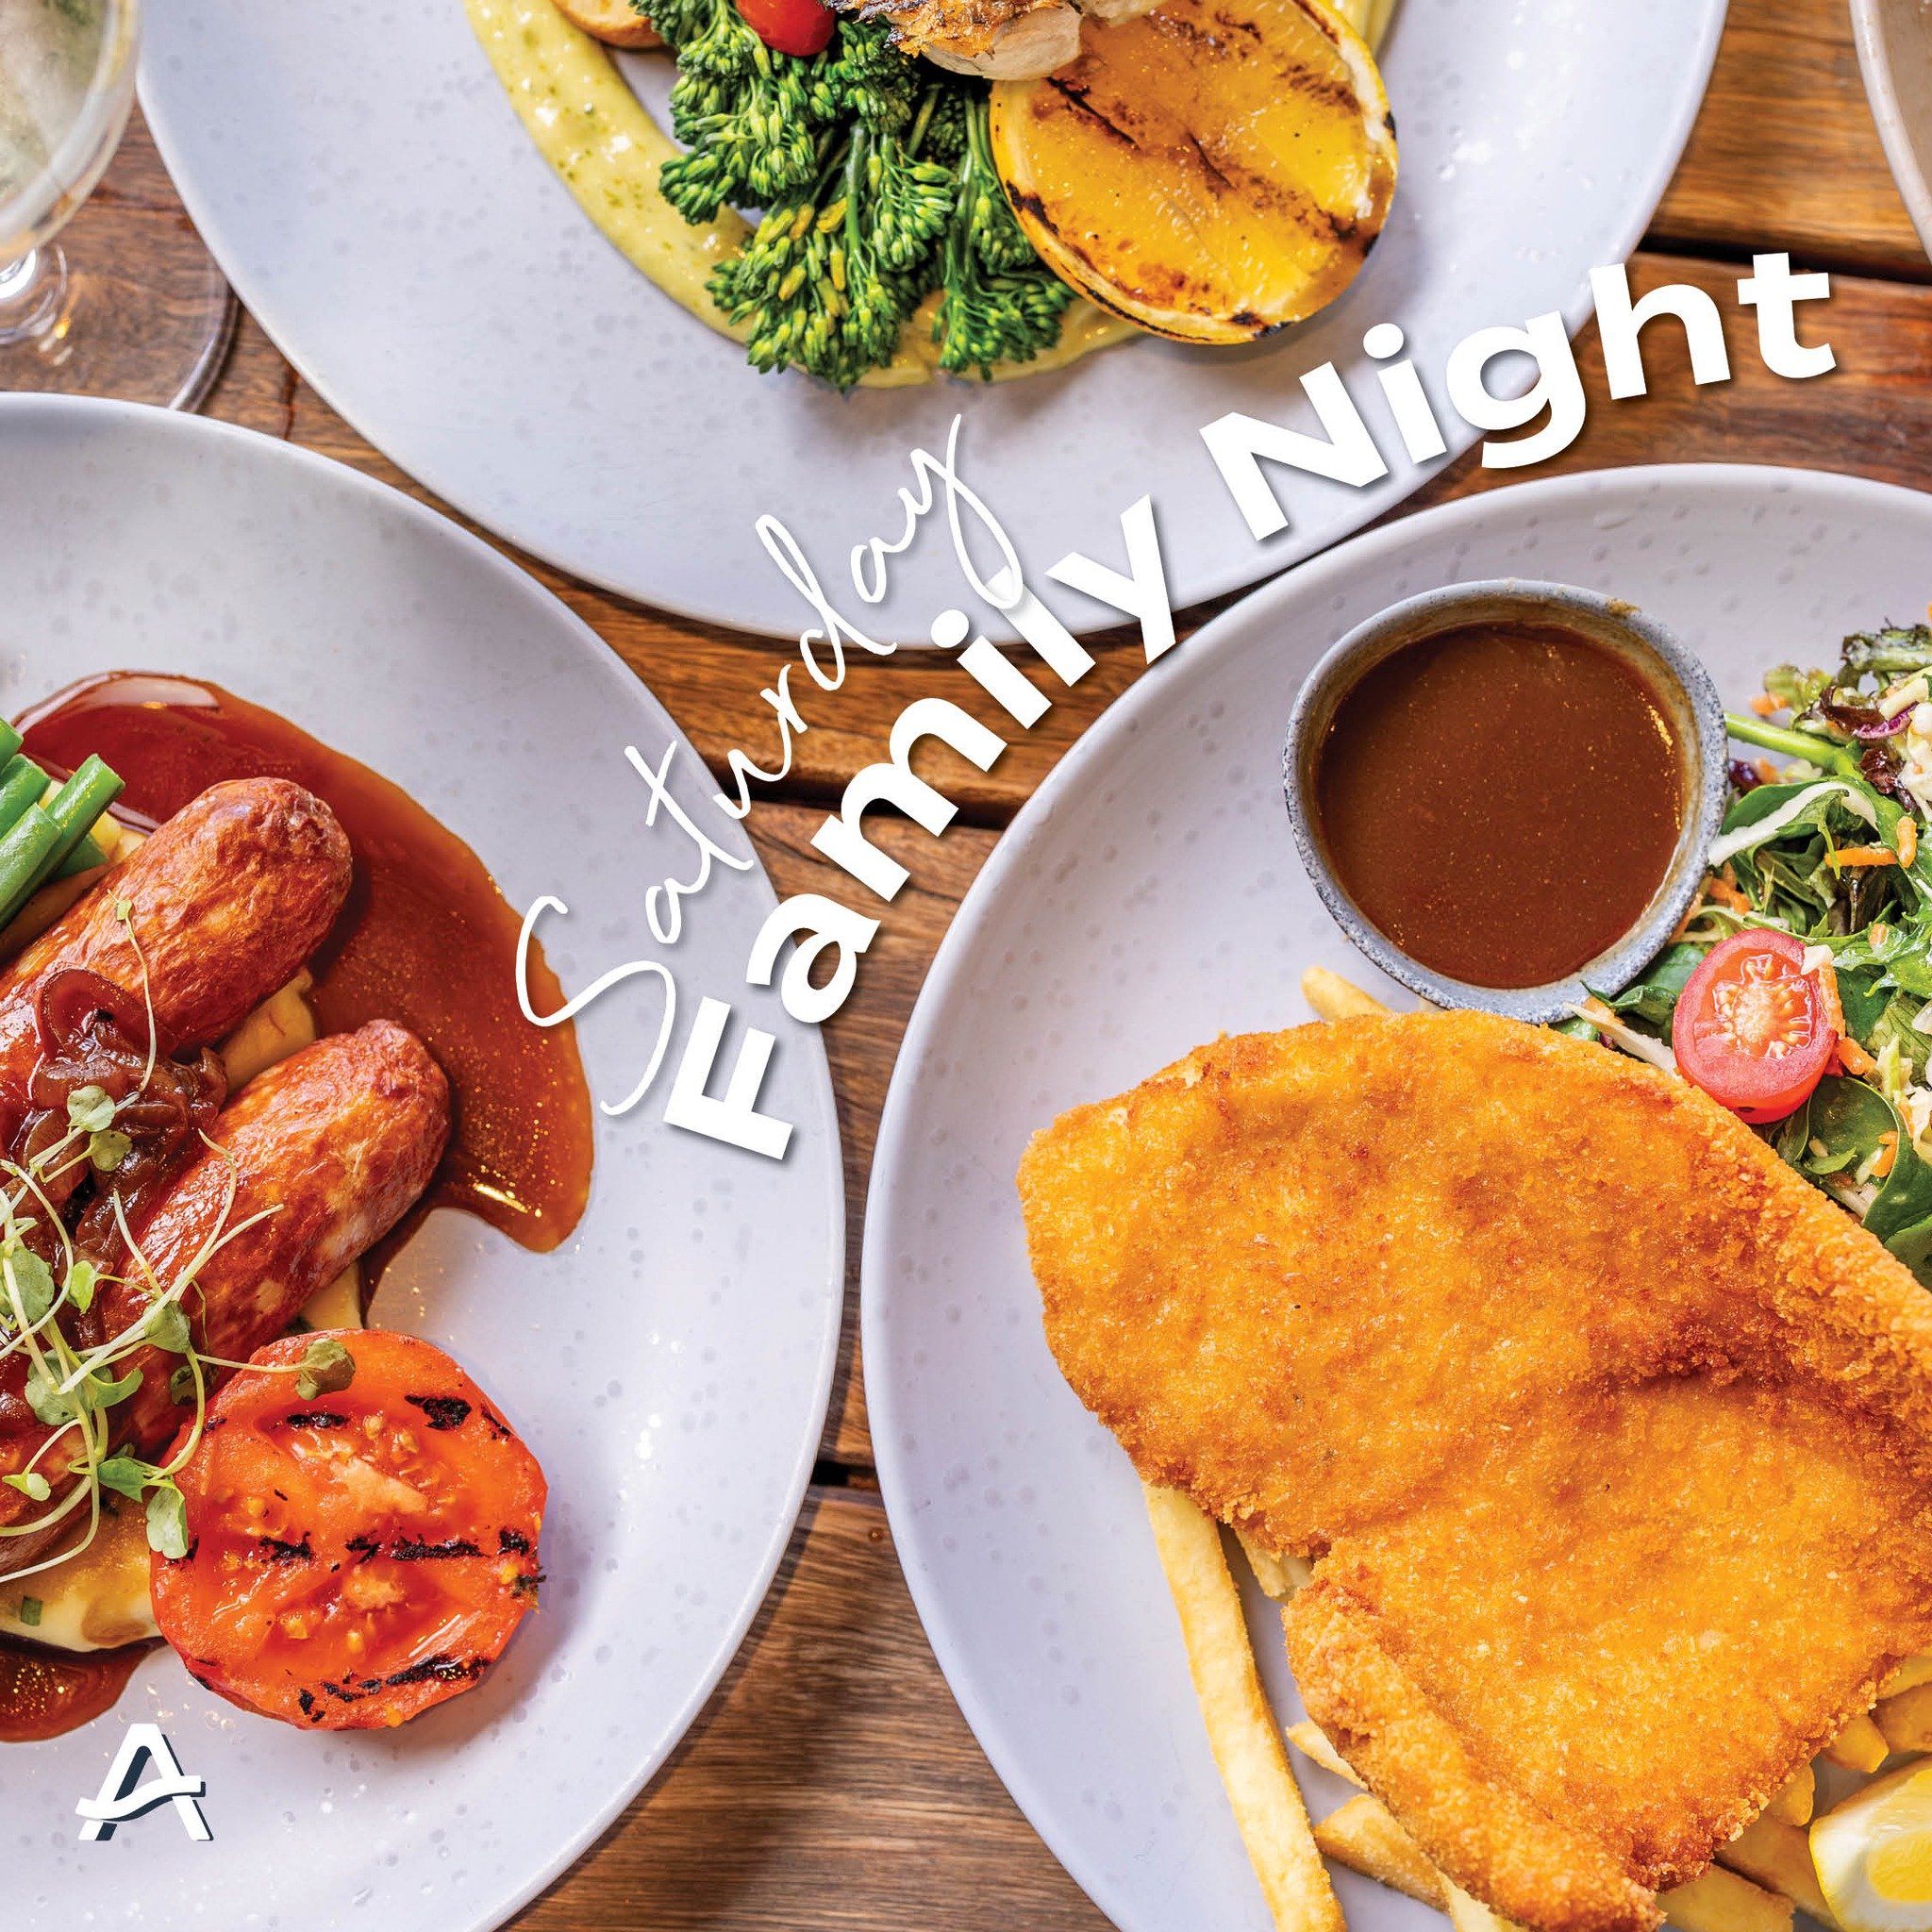 There&rsquo;s fun for the whole family EVERY Saturday at Ashmore Tavern!

Treat the whole family to a special evening with our $5 Kids Meals 🤩

With the purchase of any main meal, kids can enjoy a delicious meal for just $5! Plus, there's face paint